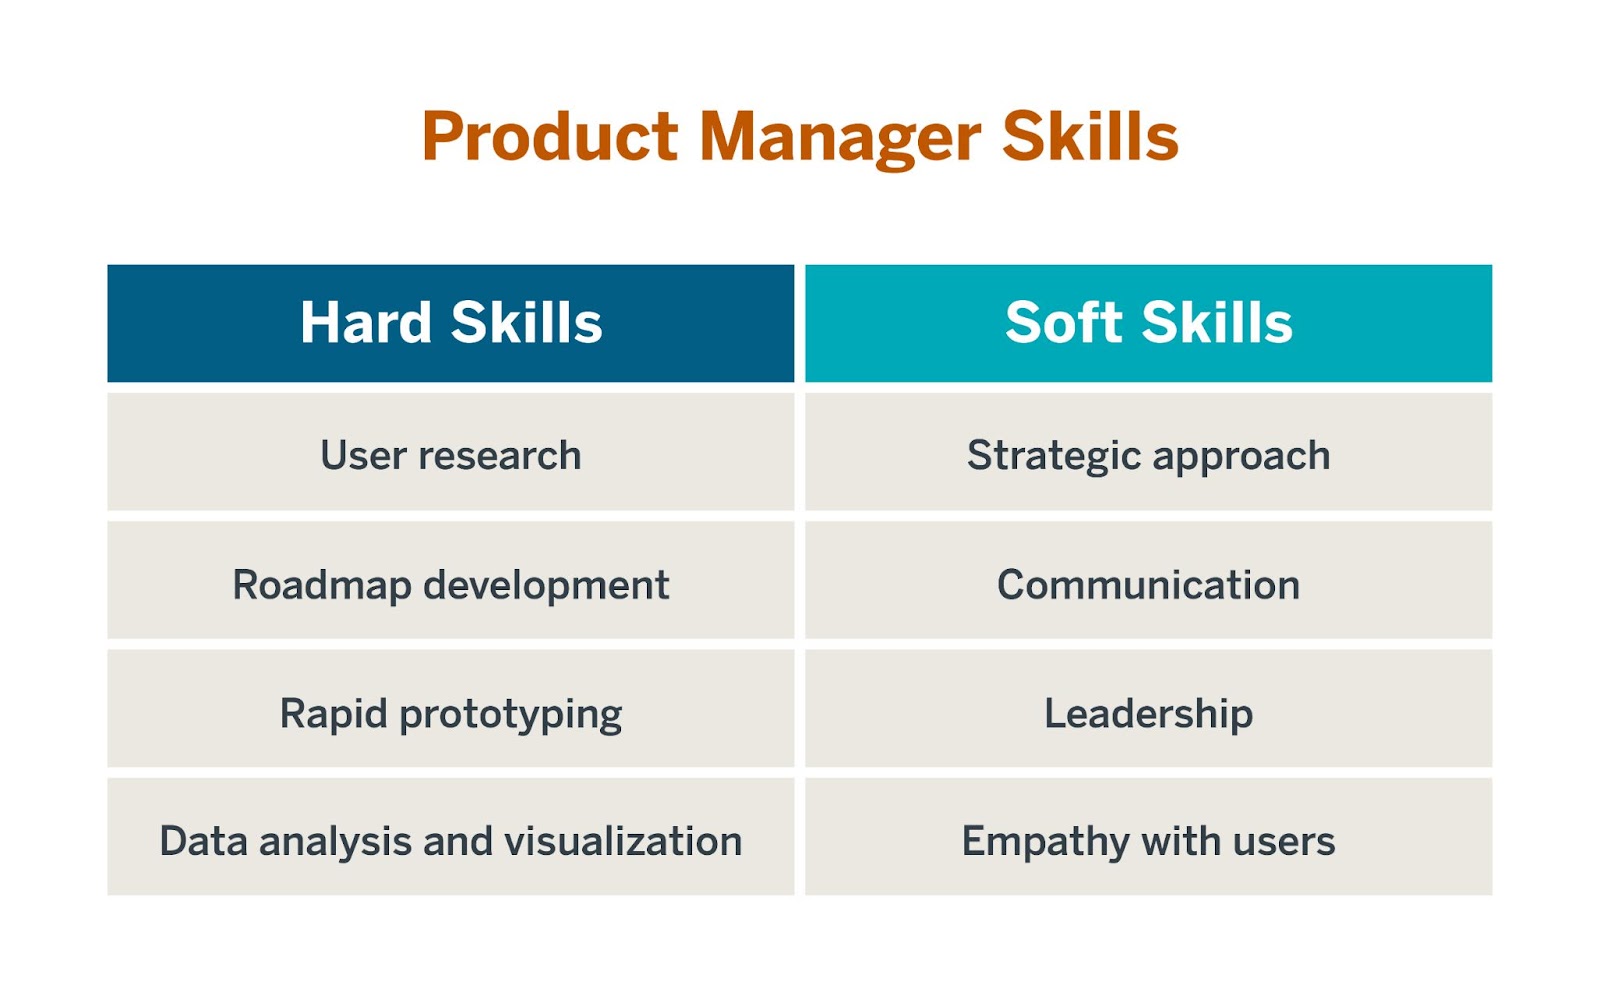 A chart that lists both hard and soft skills for product managers.